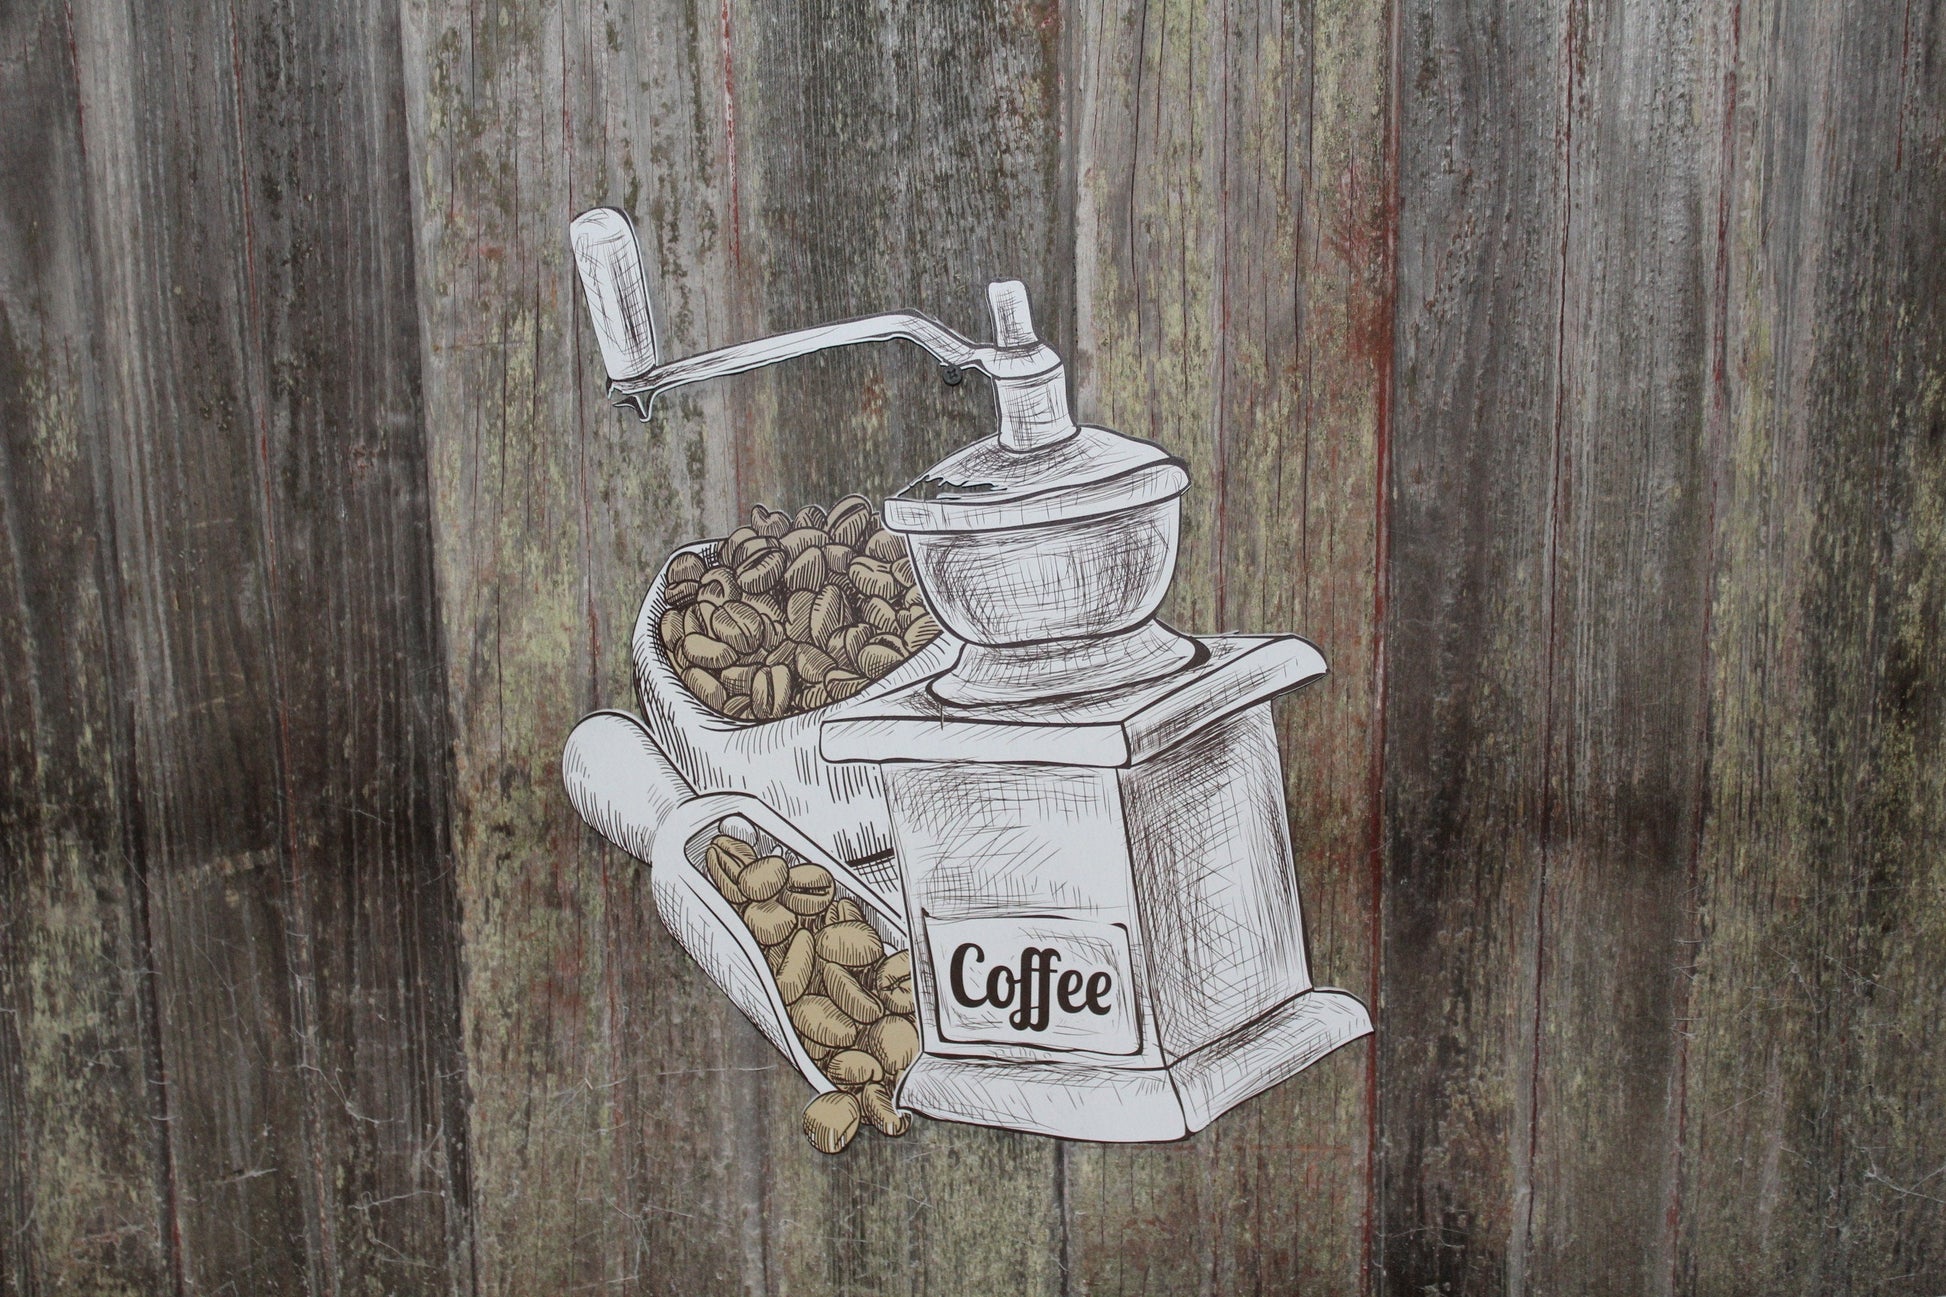 Coffee Grinder Image Uv Printed Rustic Coffee Bean Coffee Shop Espresso Extra Detailed Business Sign Wood  Coffee Shop